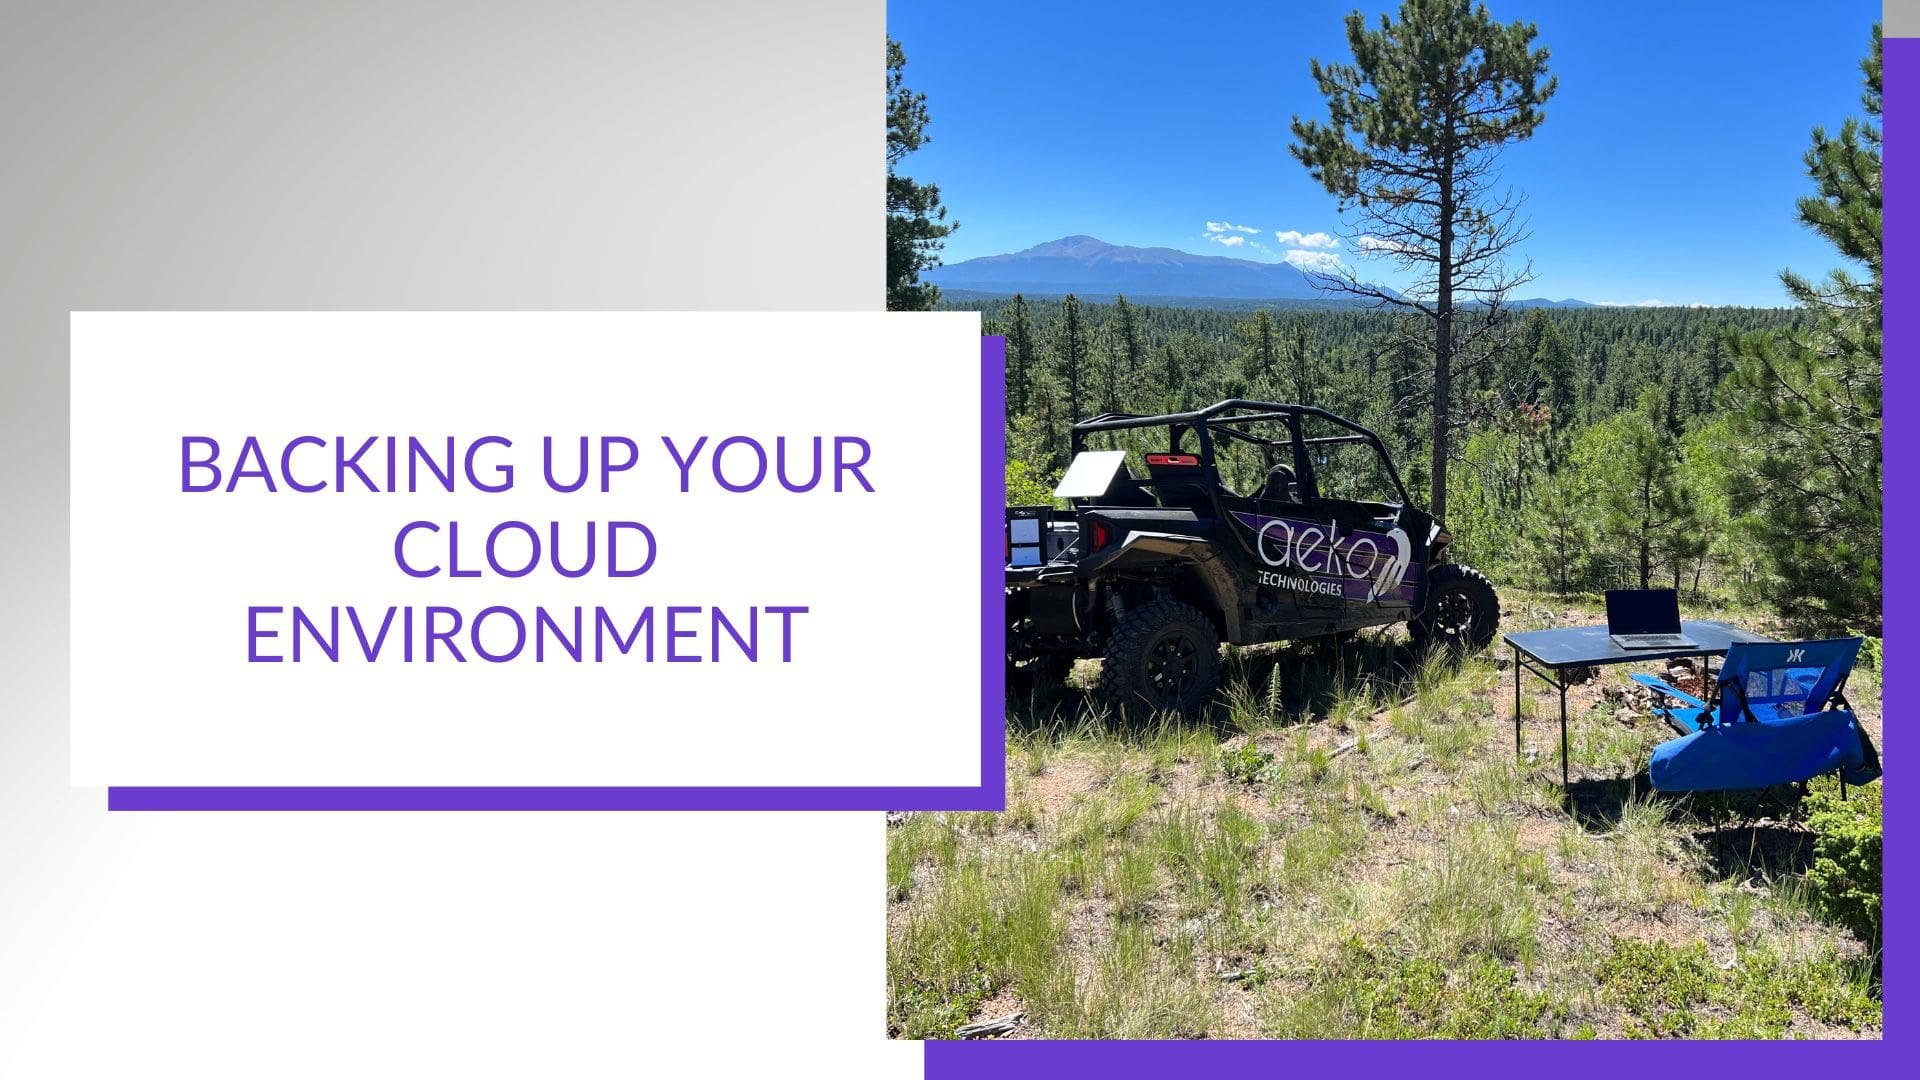 Why Backing Up Your Cloud Environment Matters - Aeko